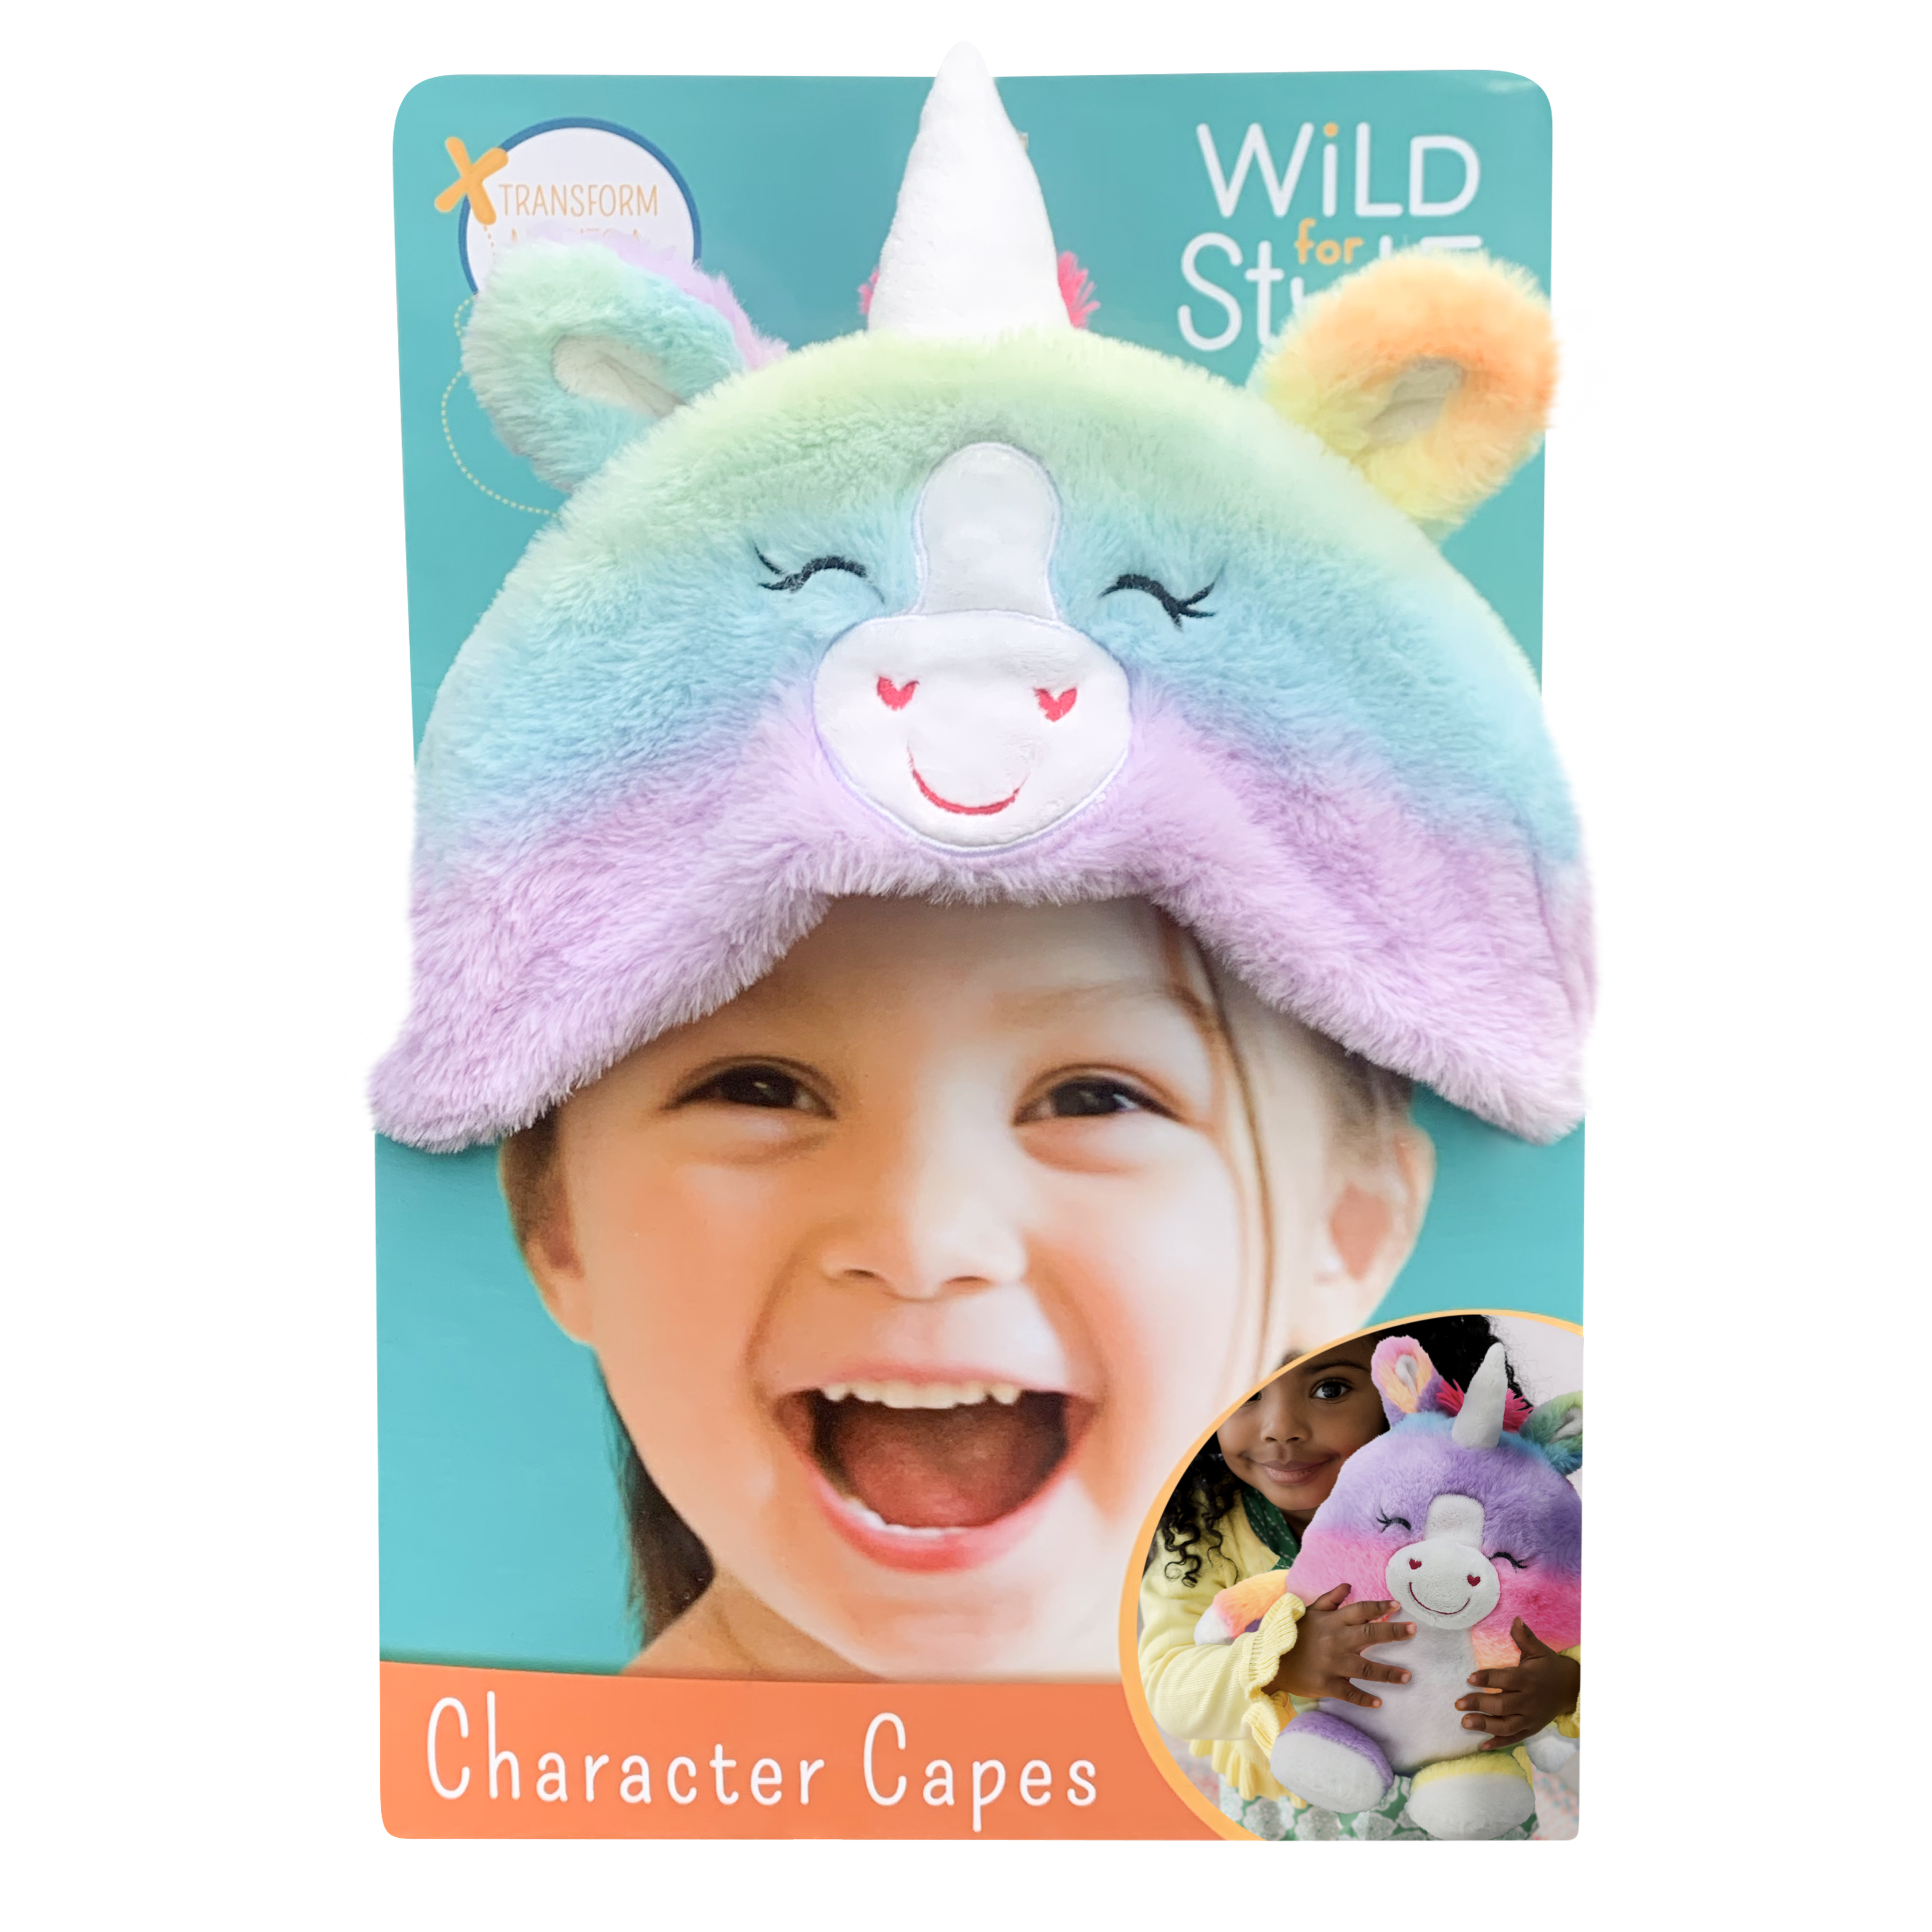 Animal Adventure® Wild for Style™ 2-in-1 Transformable Character Cape & Plush Pal – Unicorn - image 7 of 7